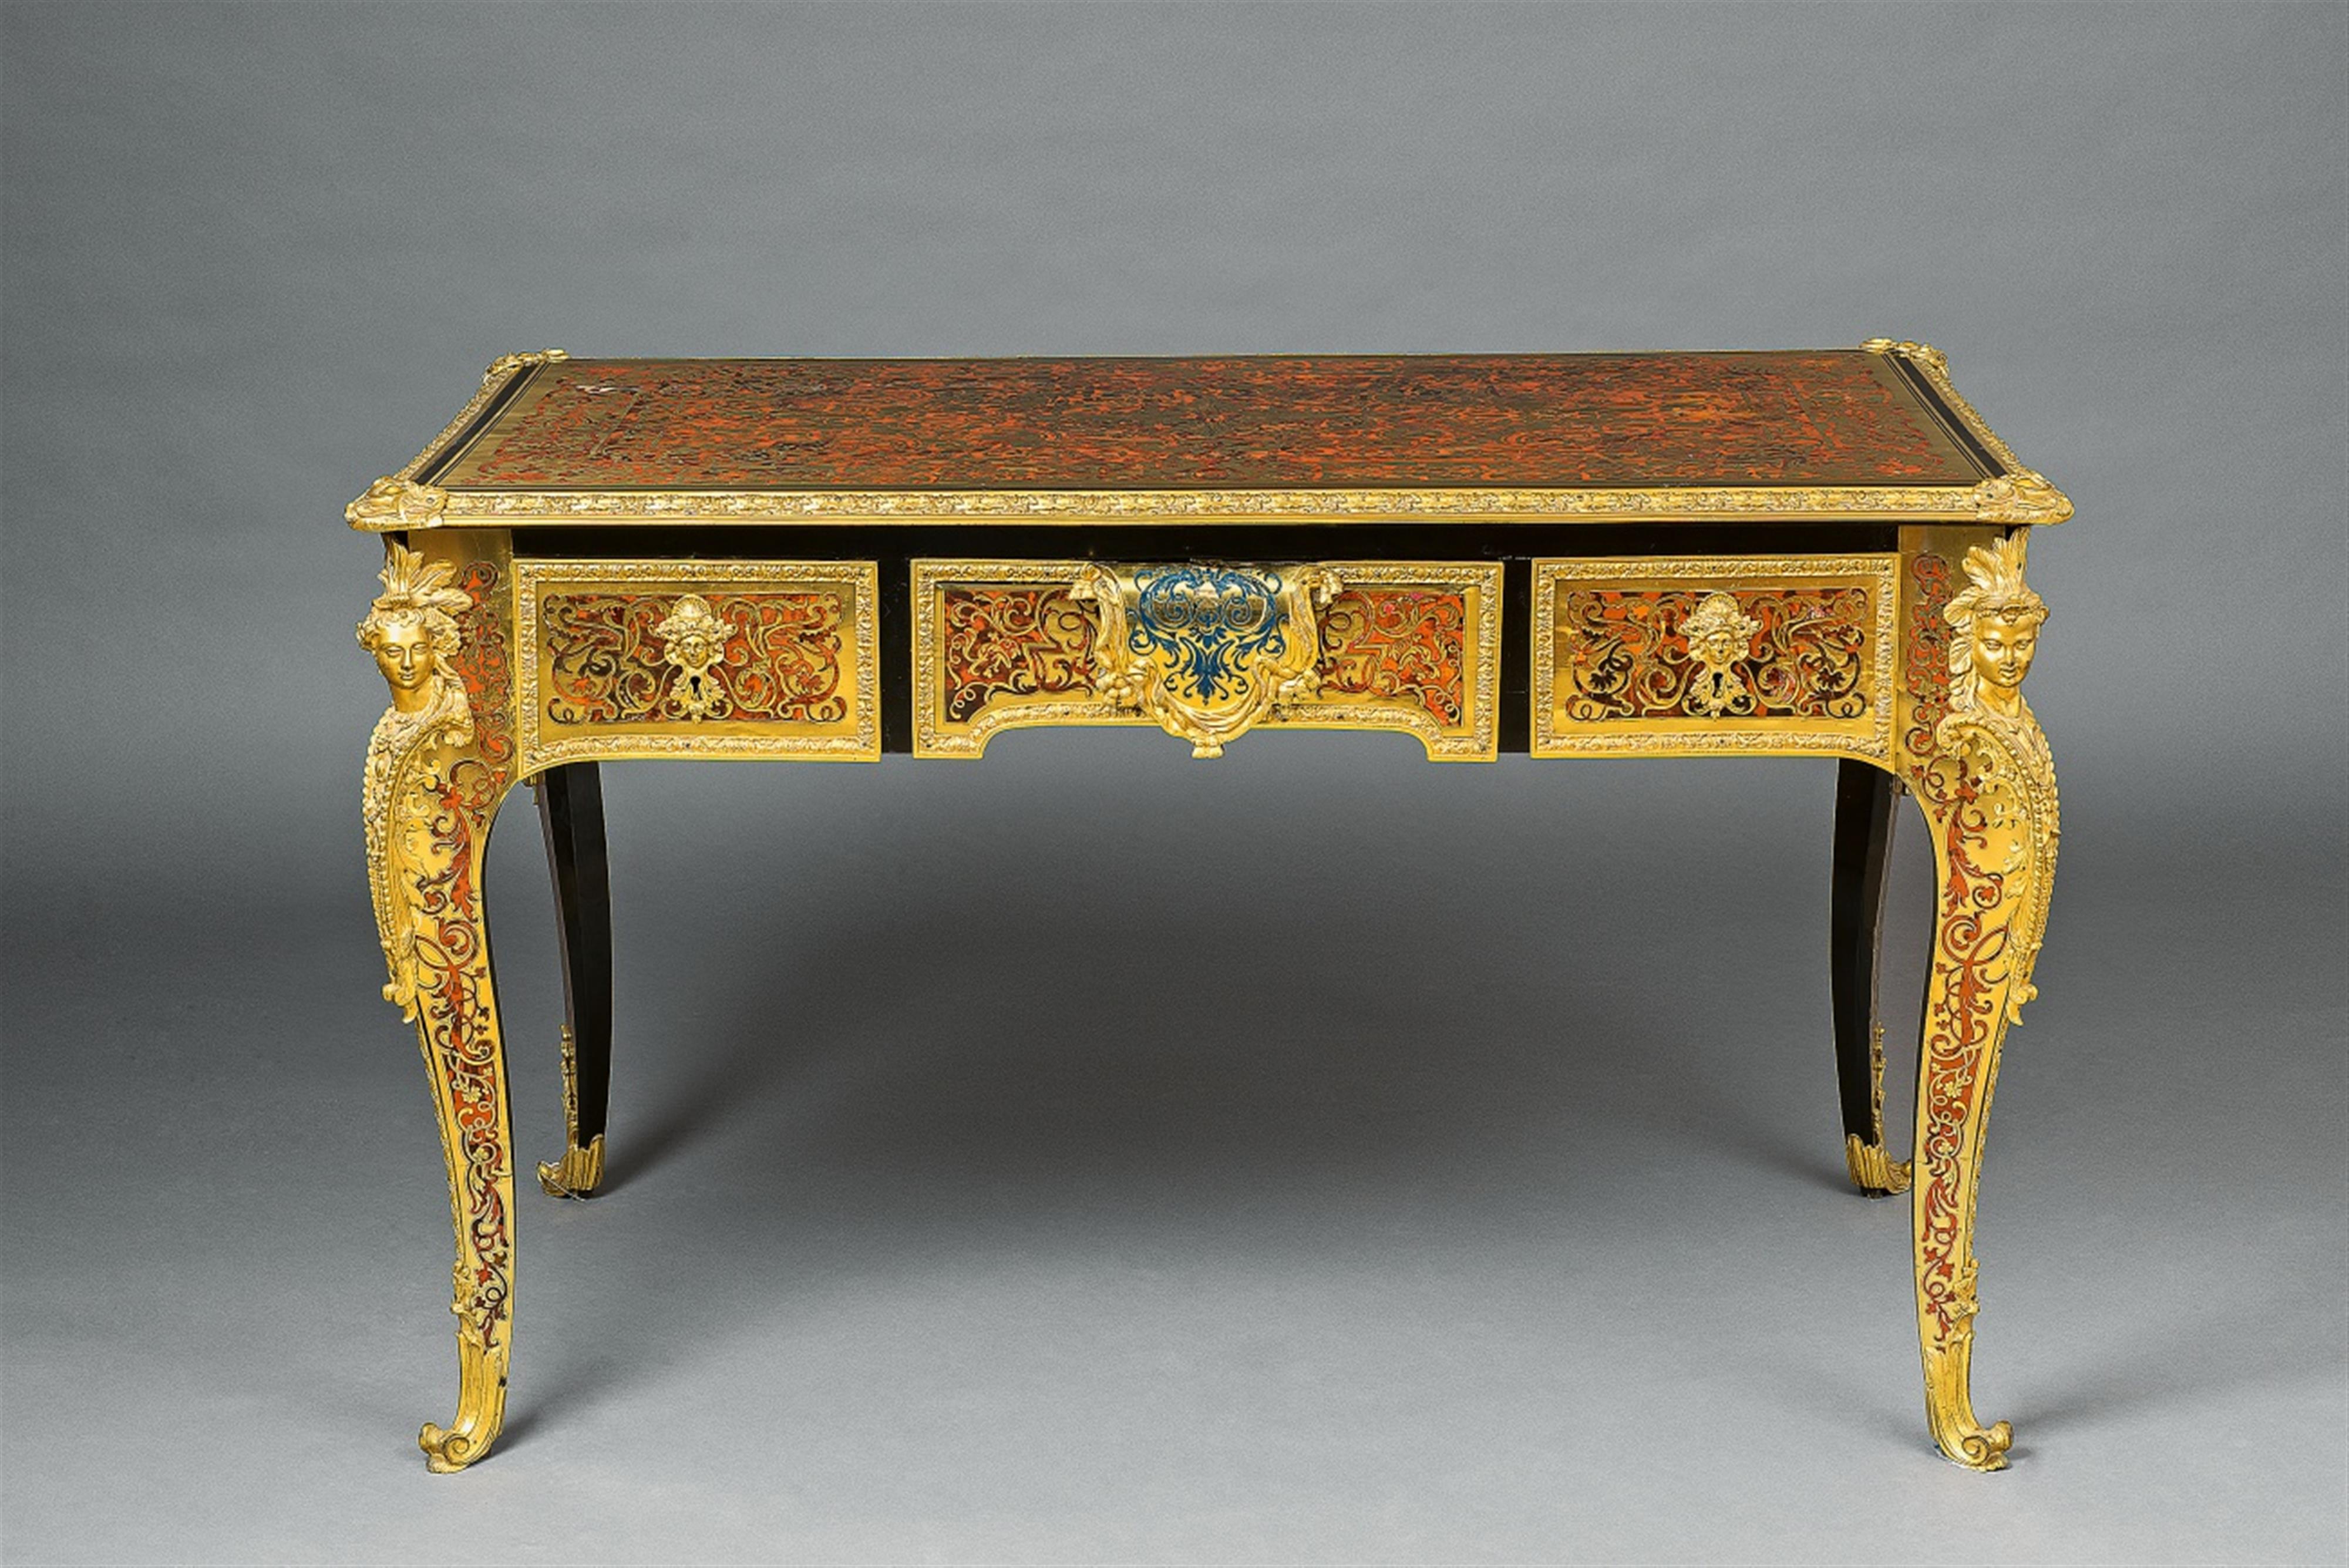 A mid-19th century Louis XIV style marquetry bureau plat - image-1